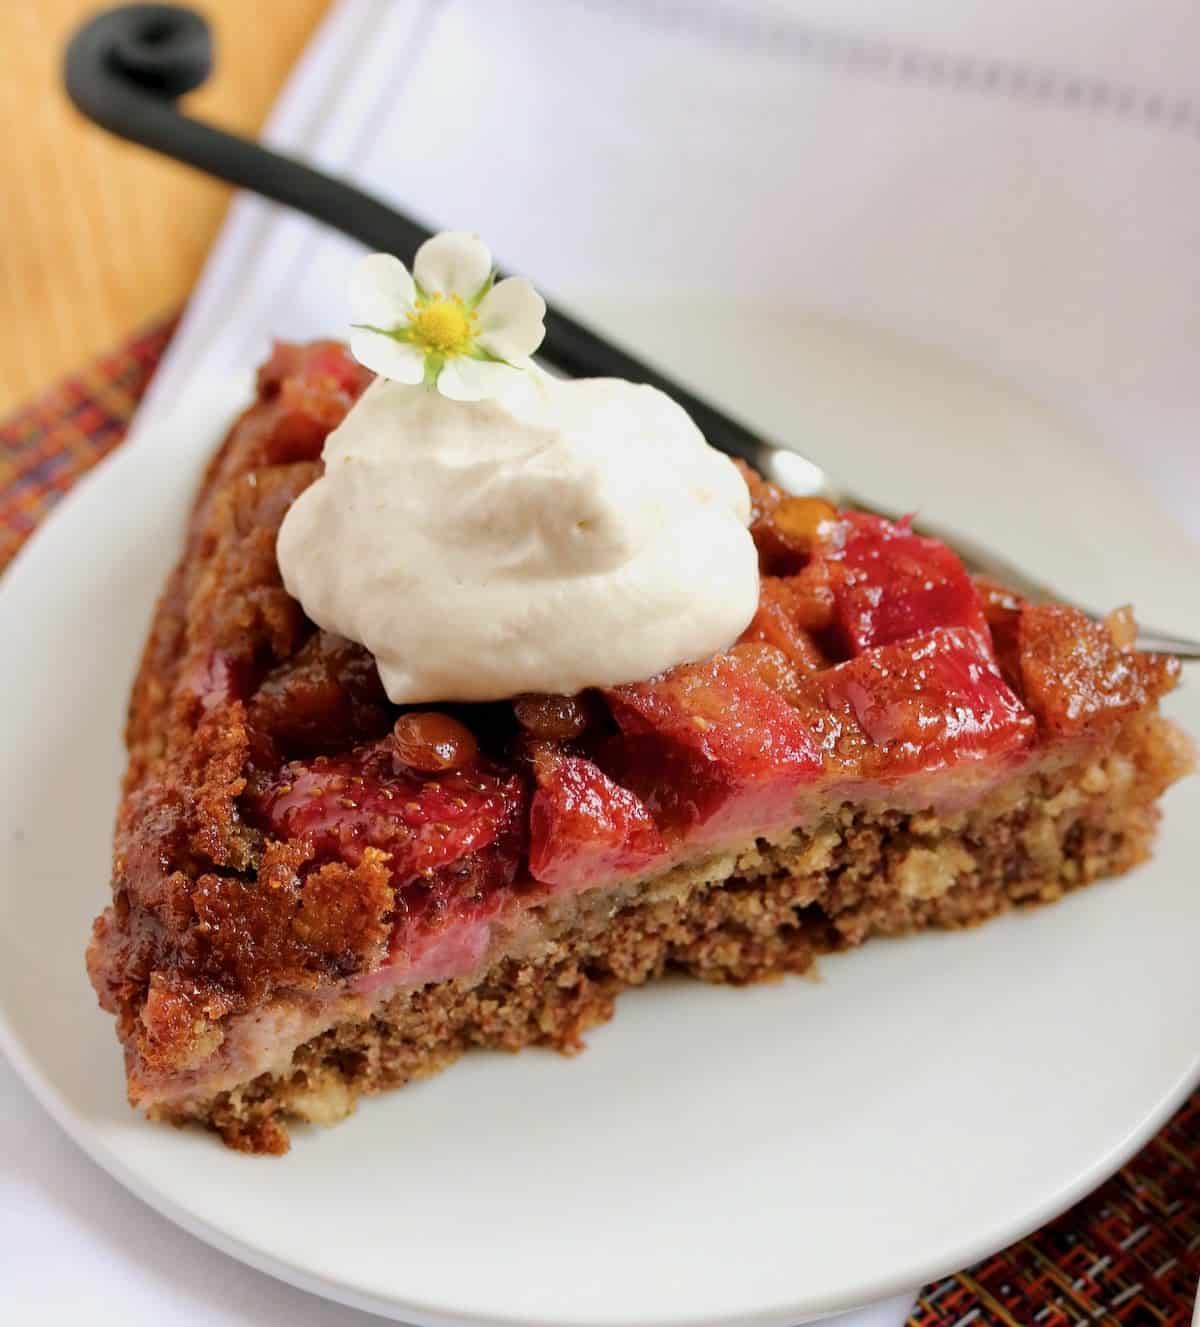 Slice of strawberry rhubarb skillet cake with whipped cream.